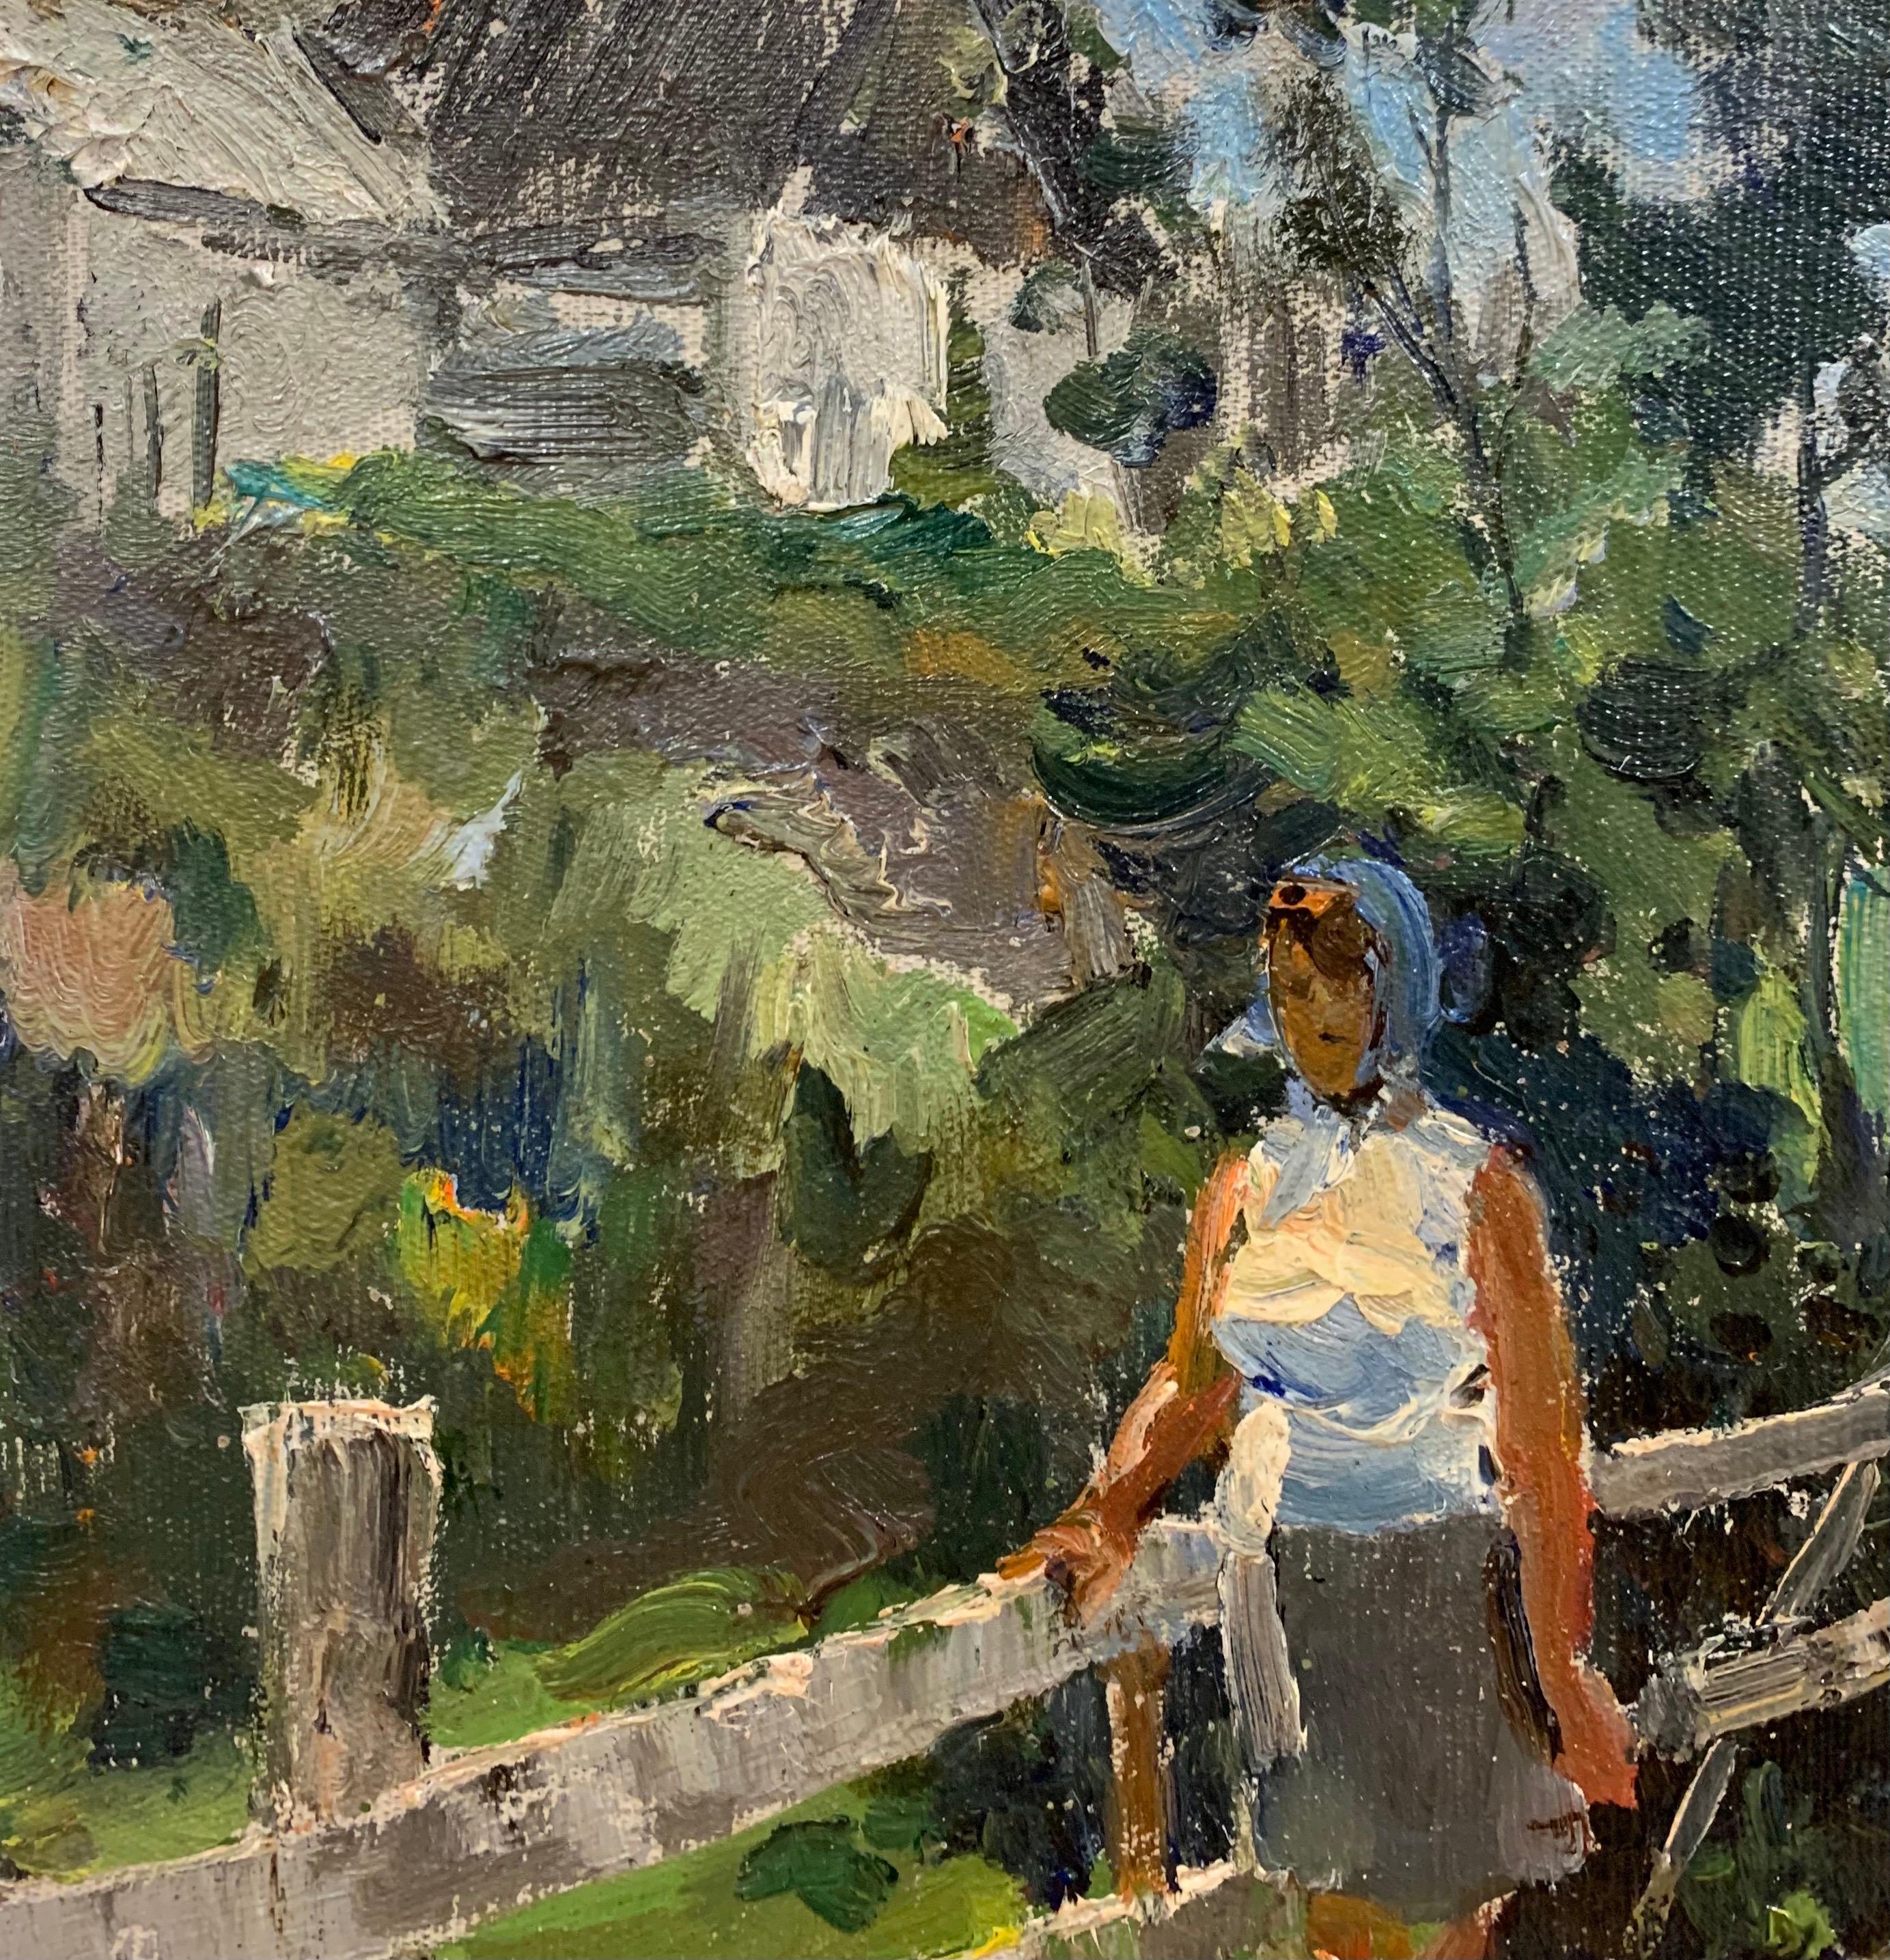 Woman, Countryside, Green,Offer Free Shipping
LEONID VAICHLIA  (St. Petersburg, 1922)

Works by Leonid Vaichlia can be found in various private collections in Europe, Japan, United States and in the following museums:


Mosca, The Ministry of